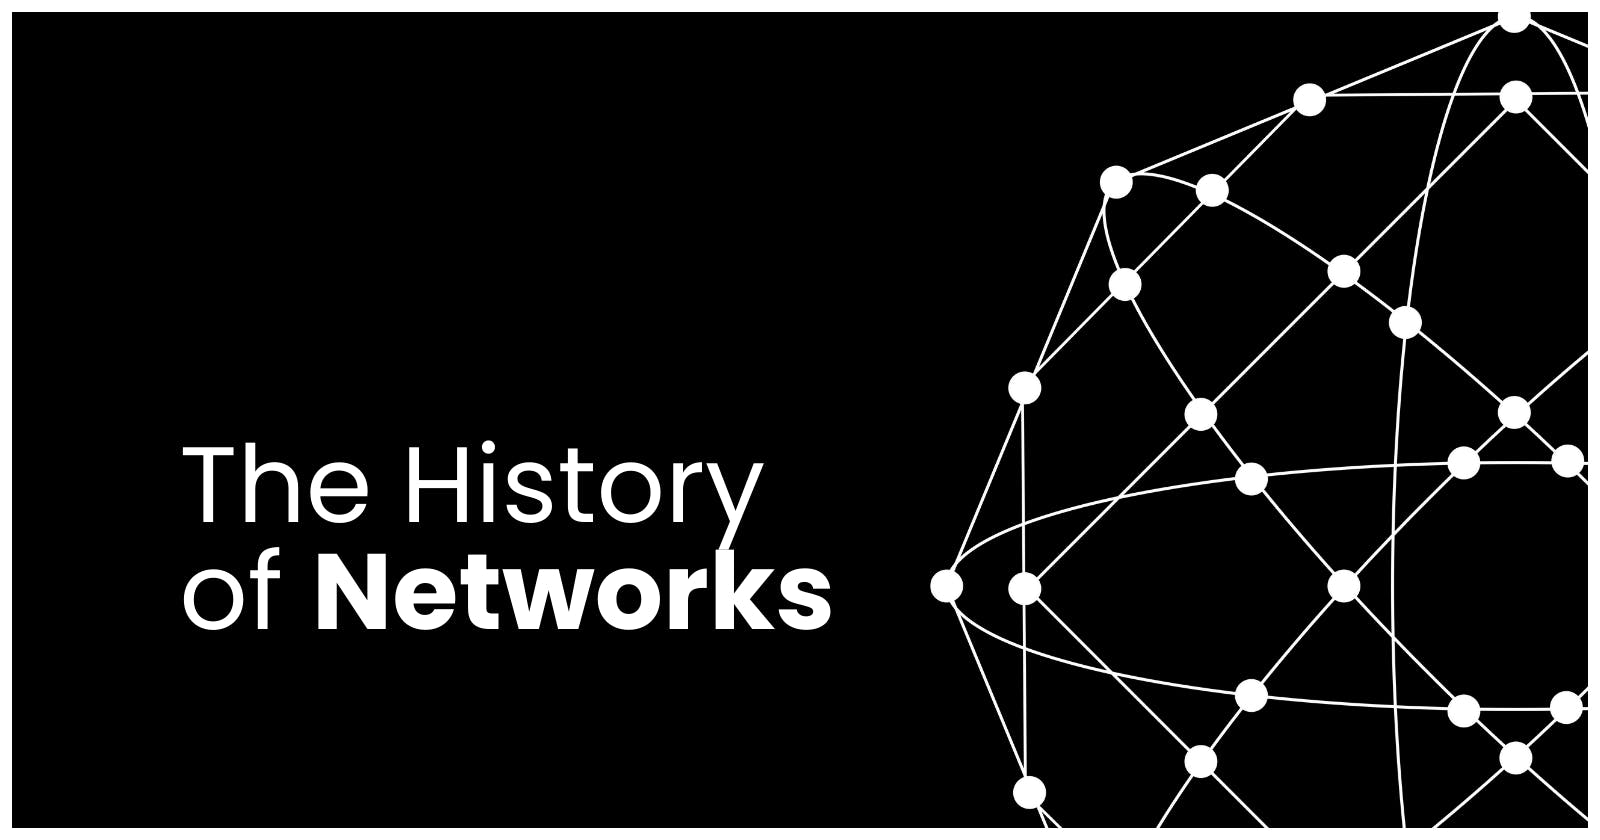 The History of Networks